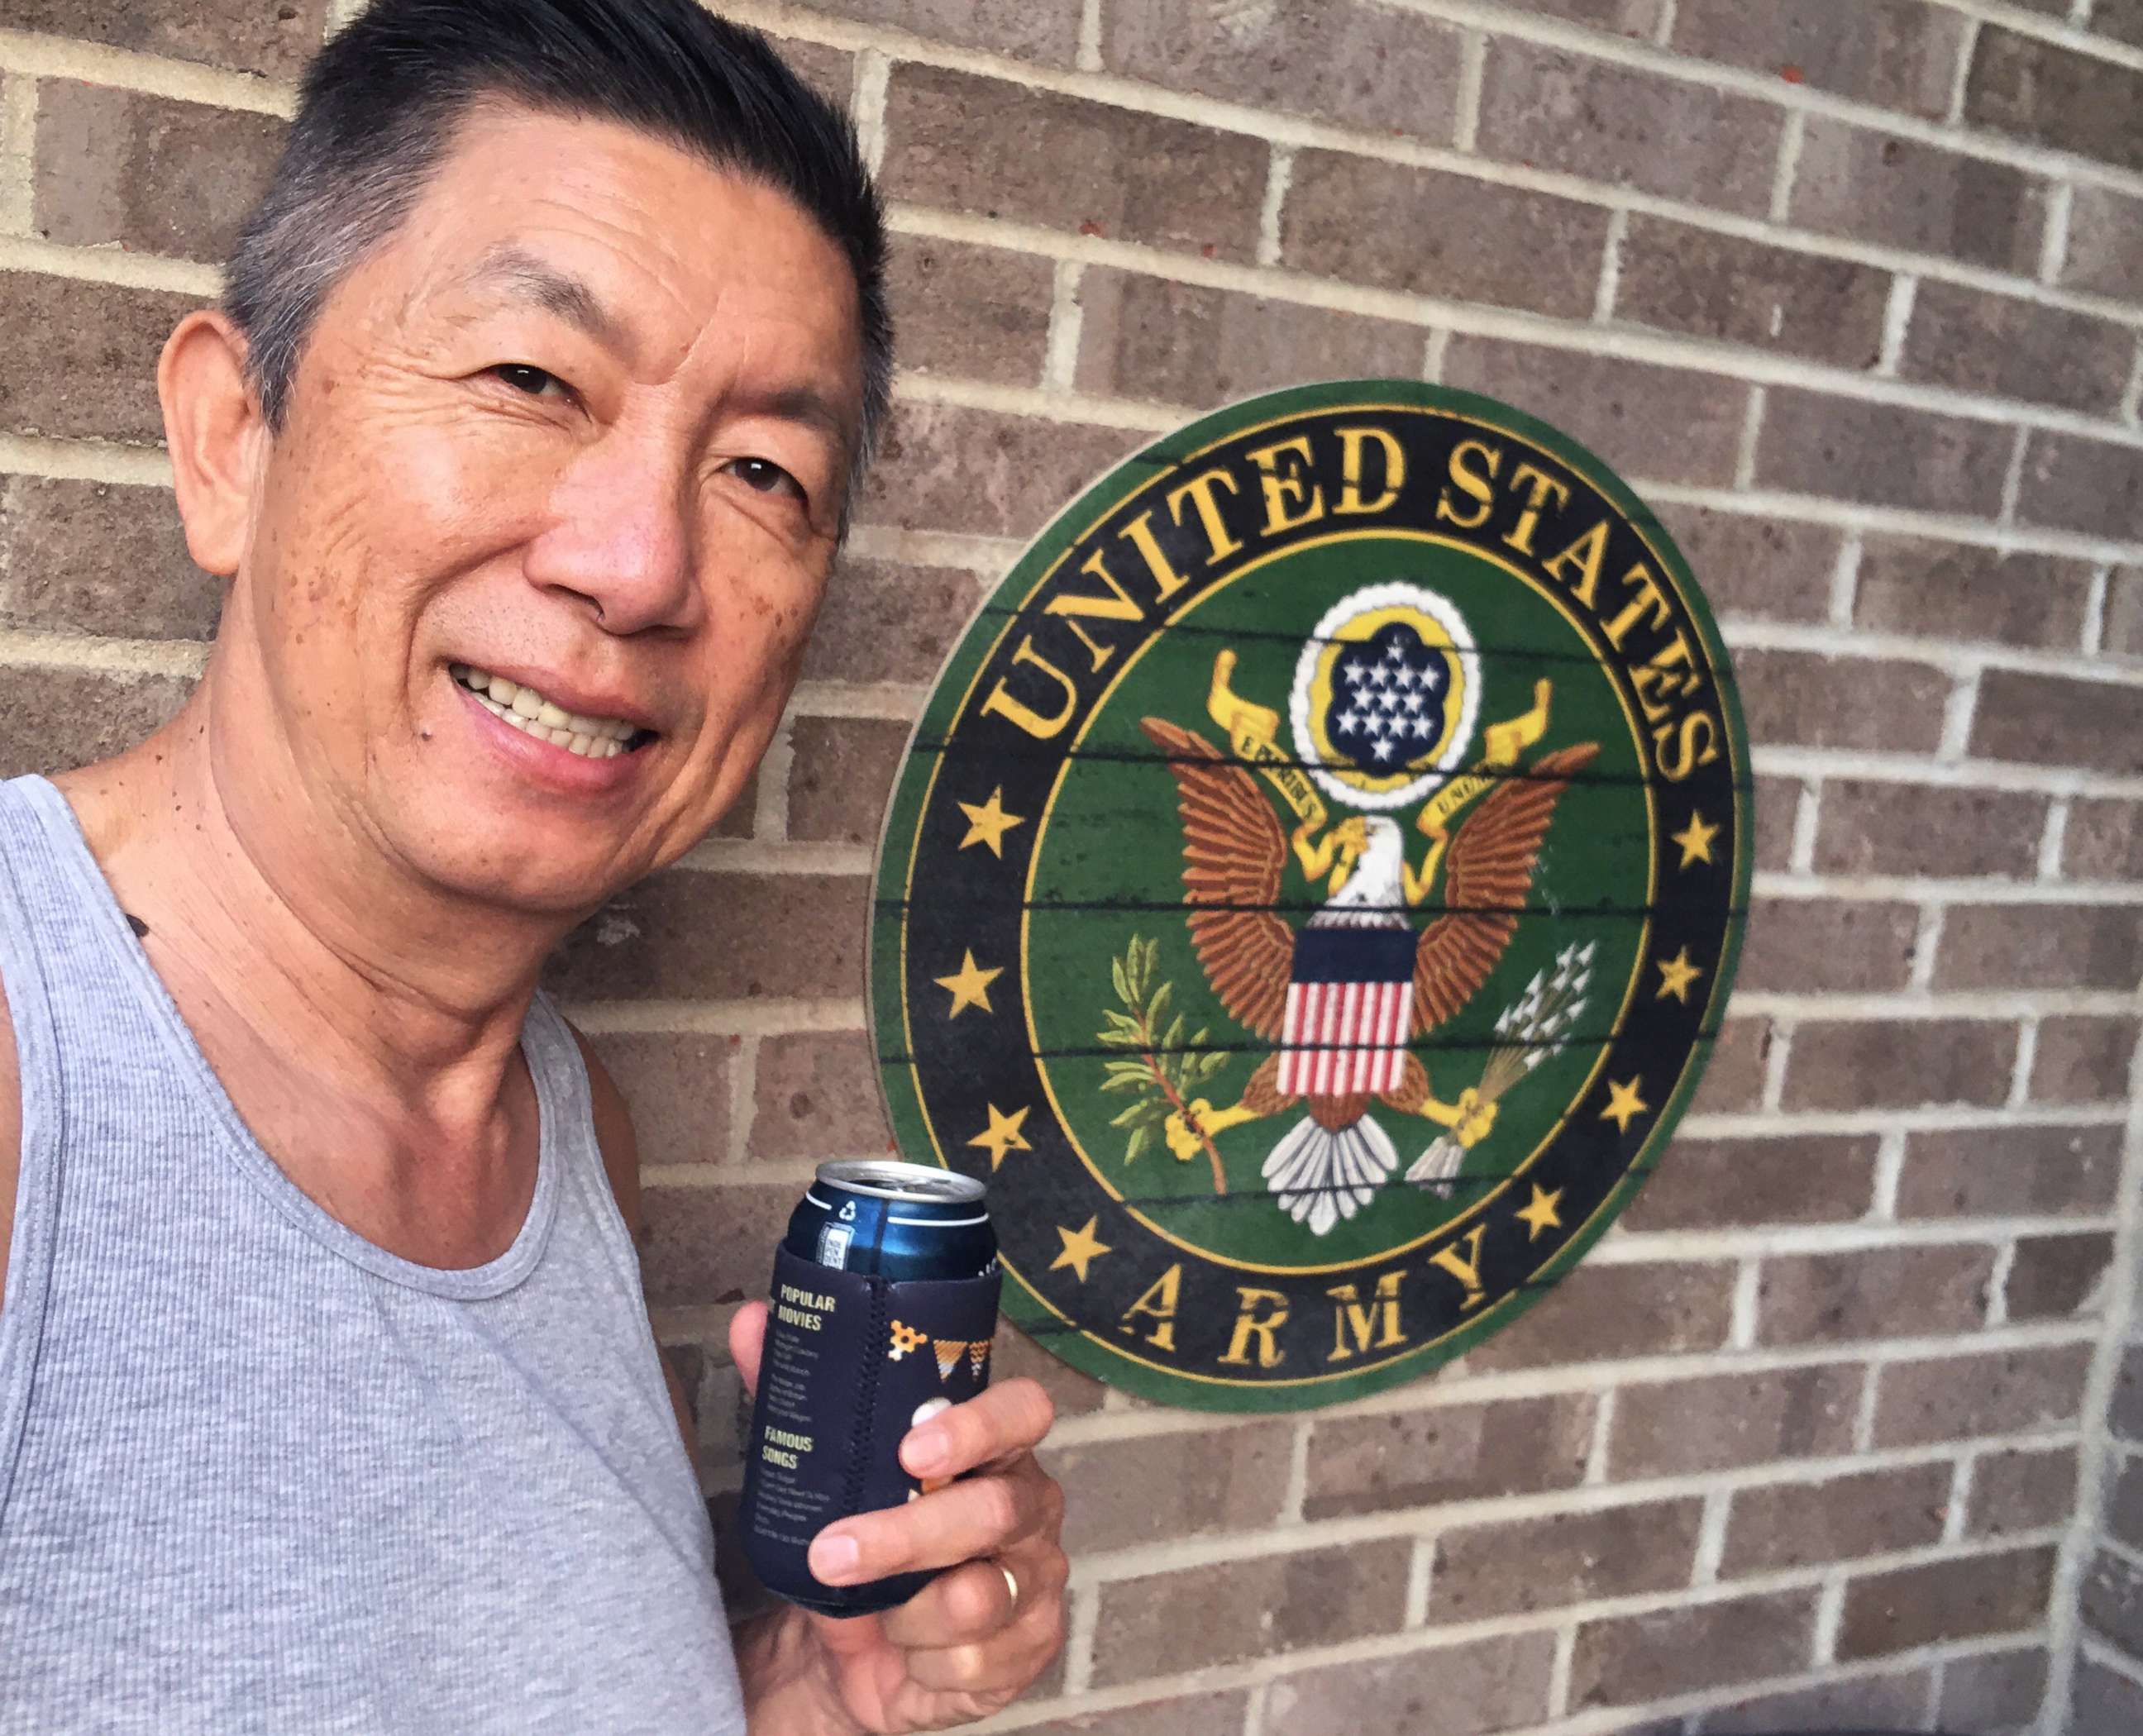 PHOTO: Lee Wong, a Westchester, Ohio board member, shared this photo of himself posing with the U.S. Army seal.